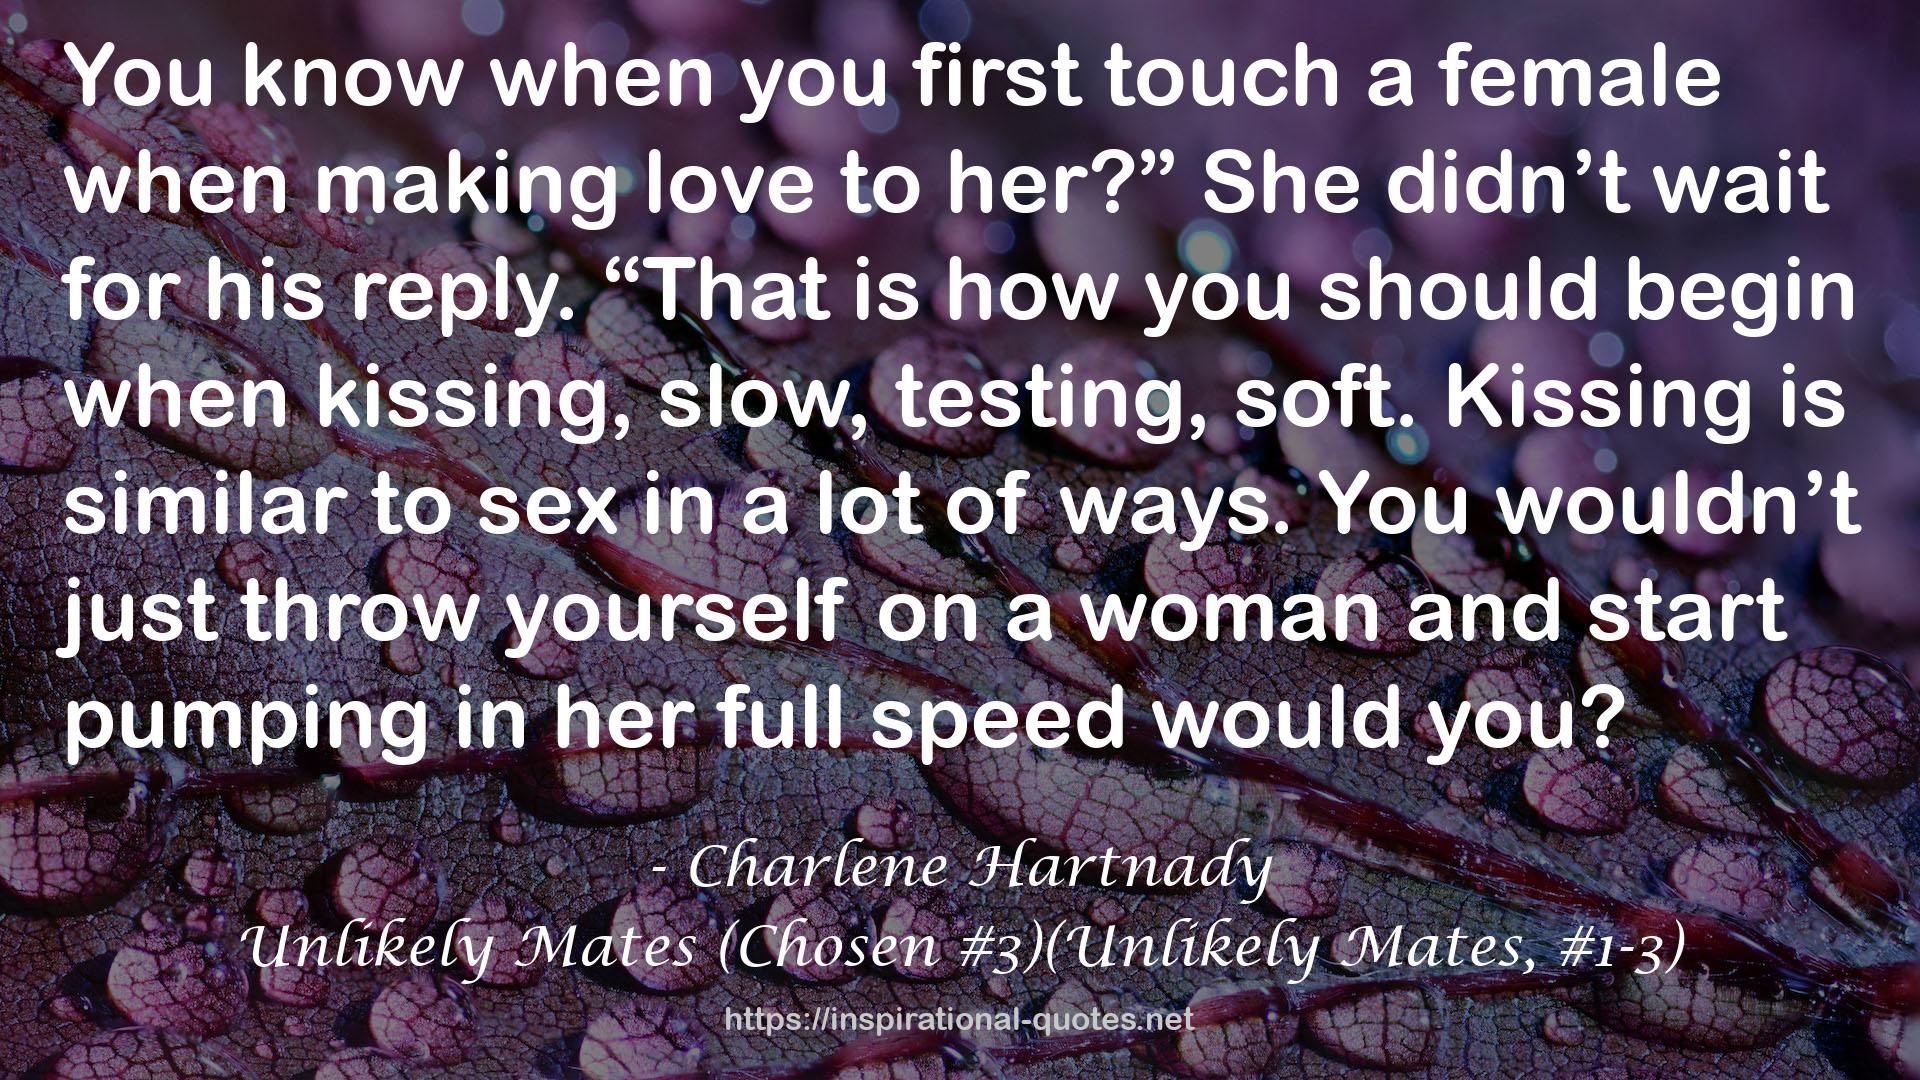 Unlikely Mates (Chosen #3)(Unlikely Mates, #1-3) QUOTES